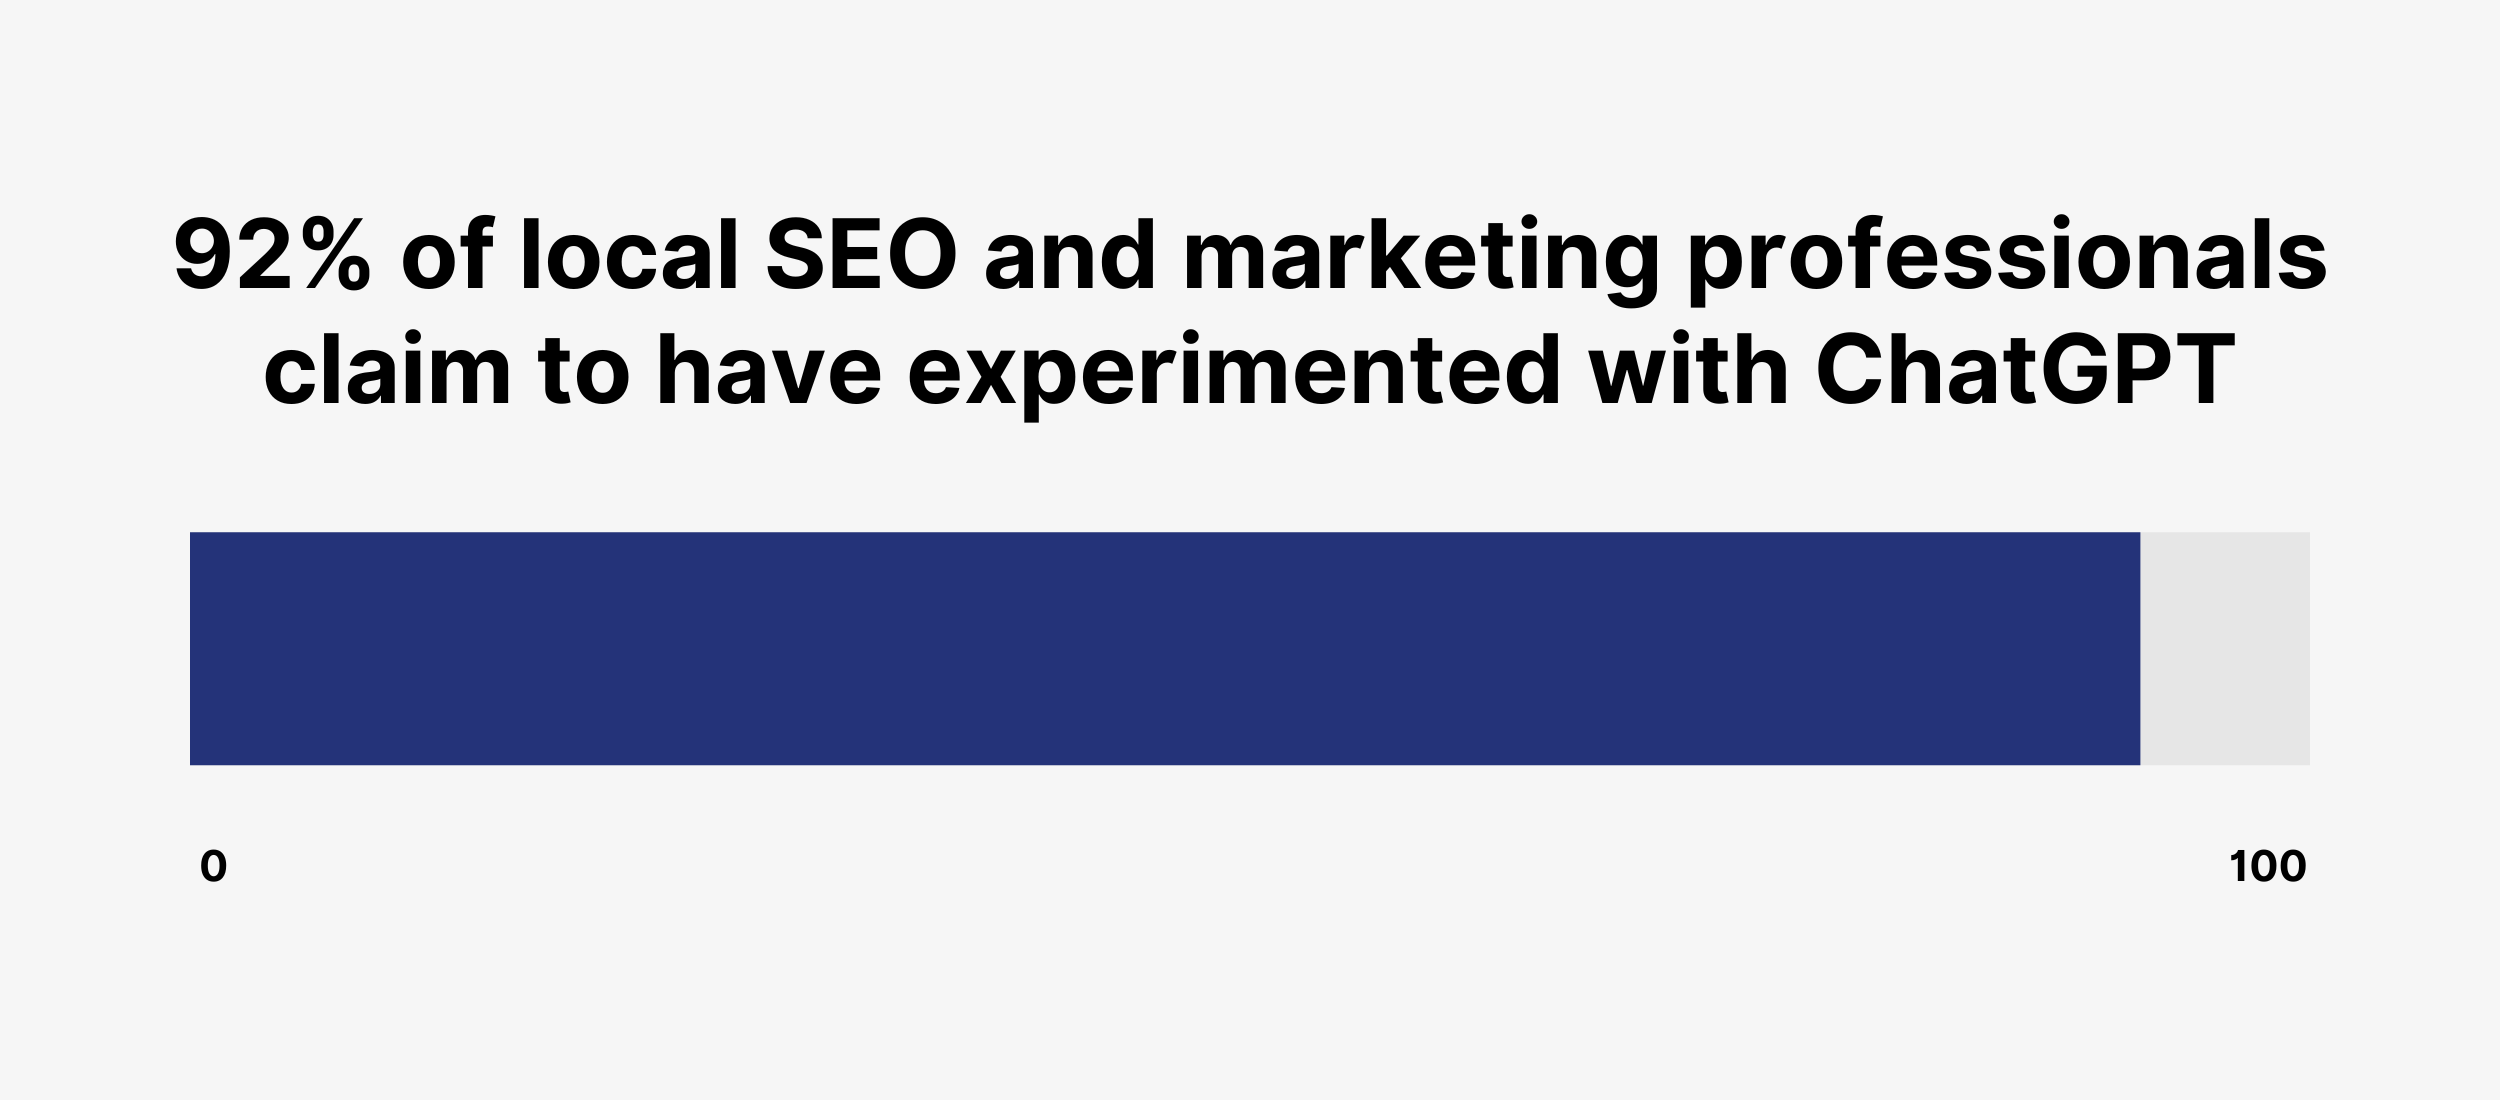 92% of local SEO and marketing professionals claim to have experimented with ChatGPT